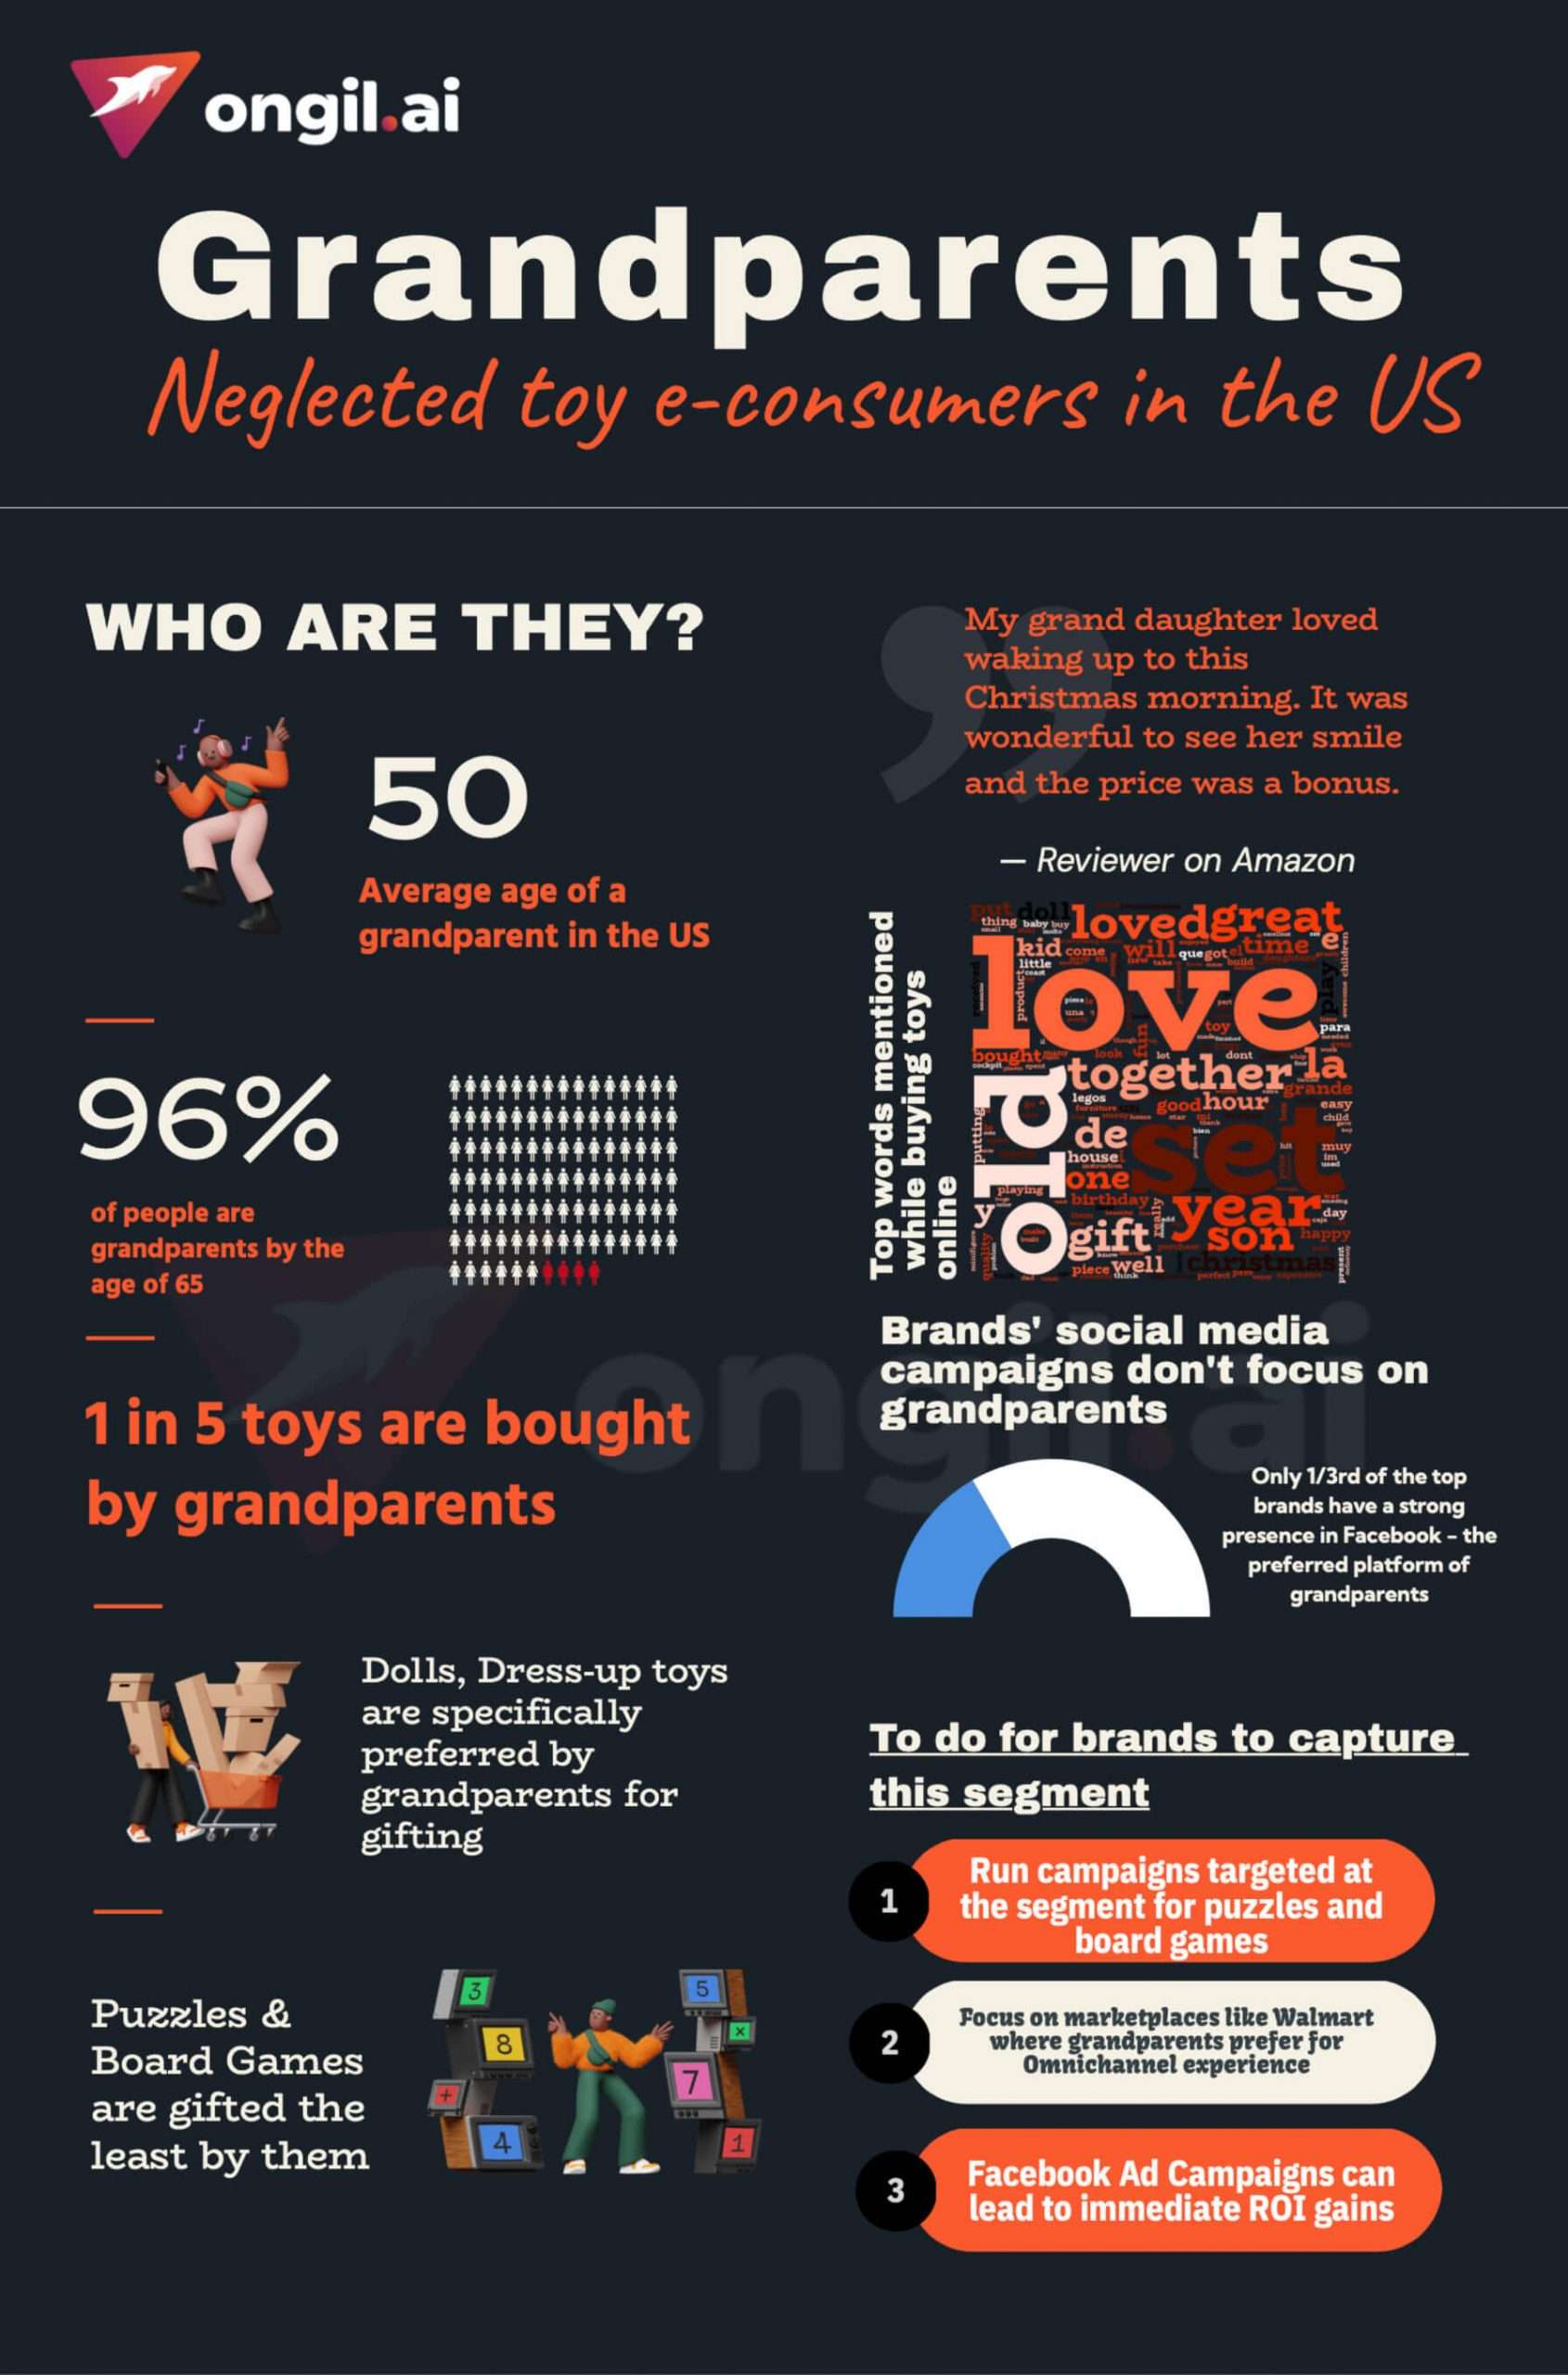 Grandparents Neglected toy E-consumers in the US